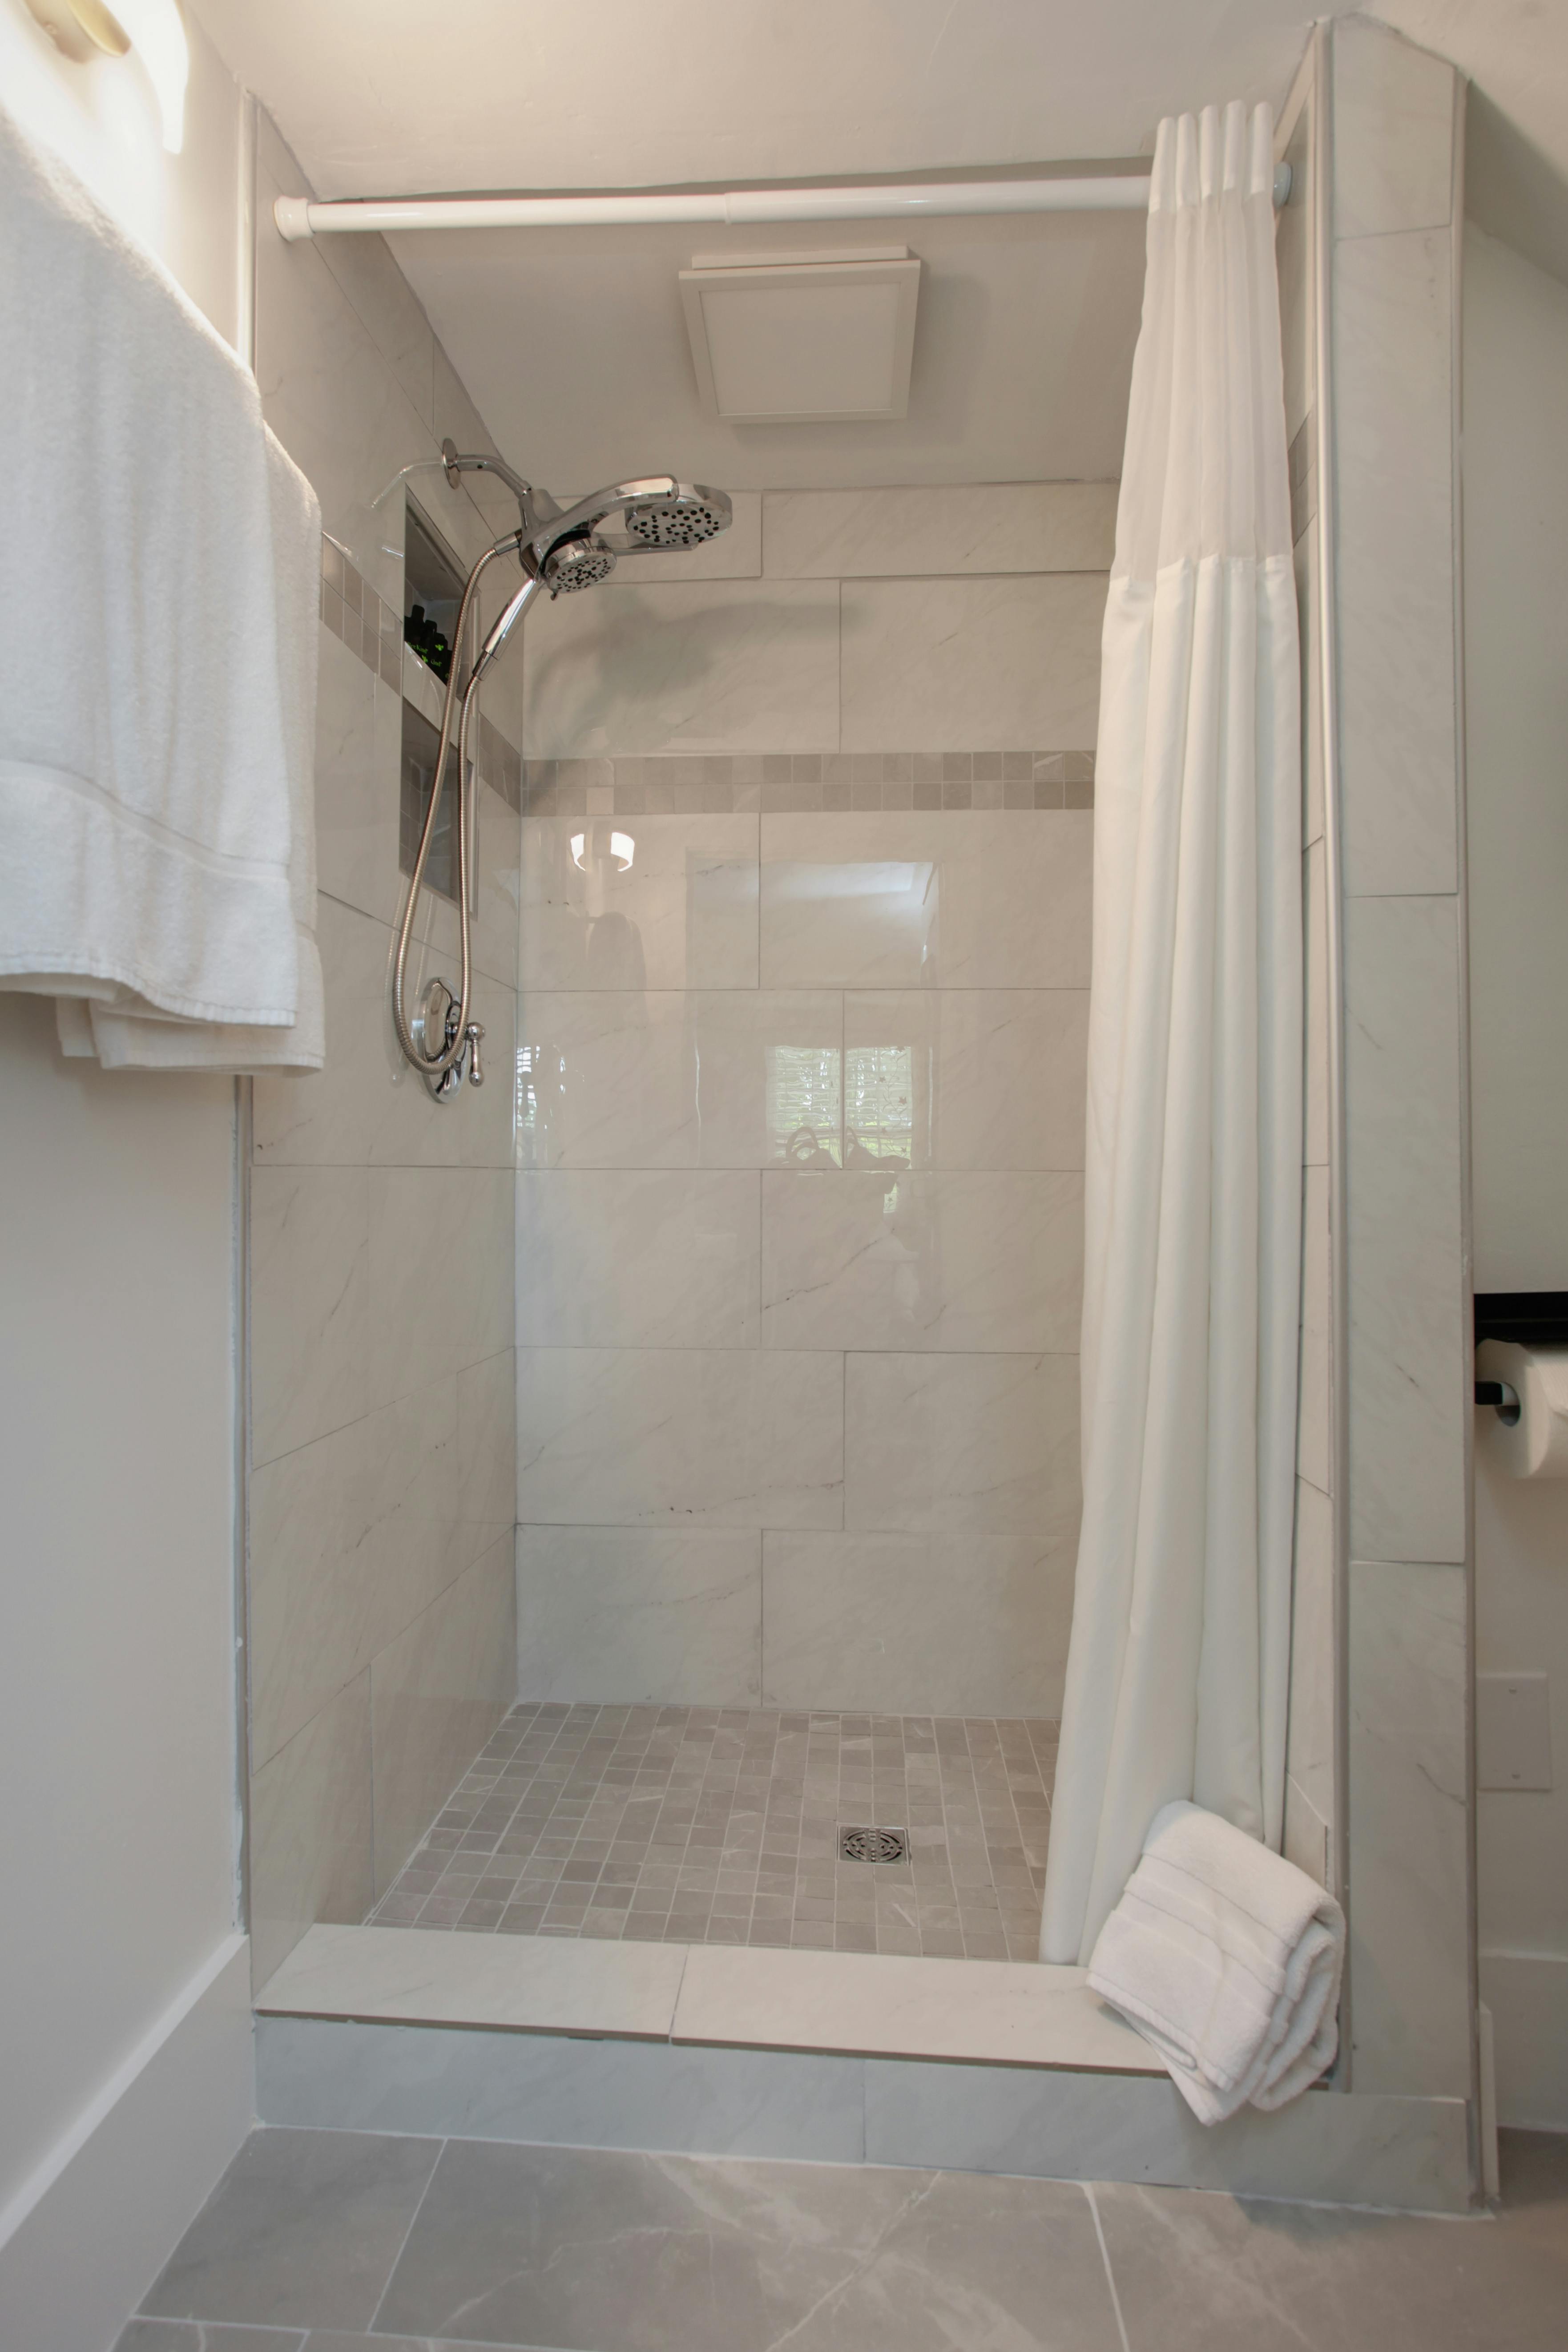 Tiled shower with silver fixtures and plush white towels on rack beside